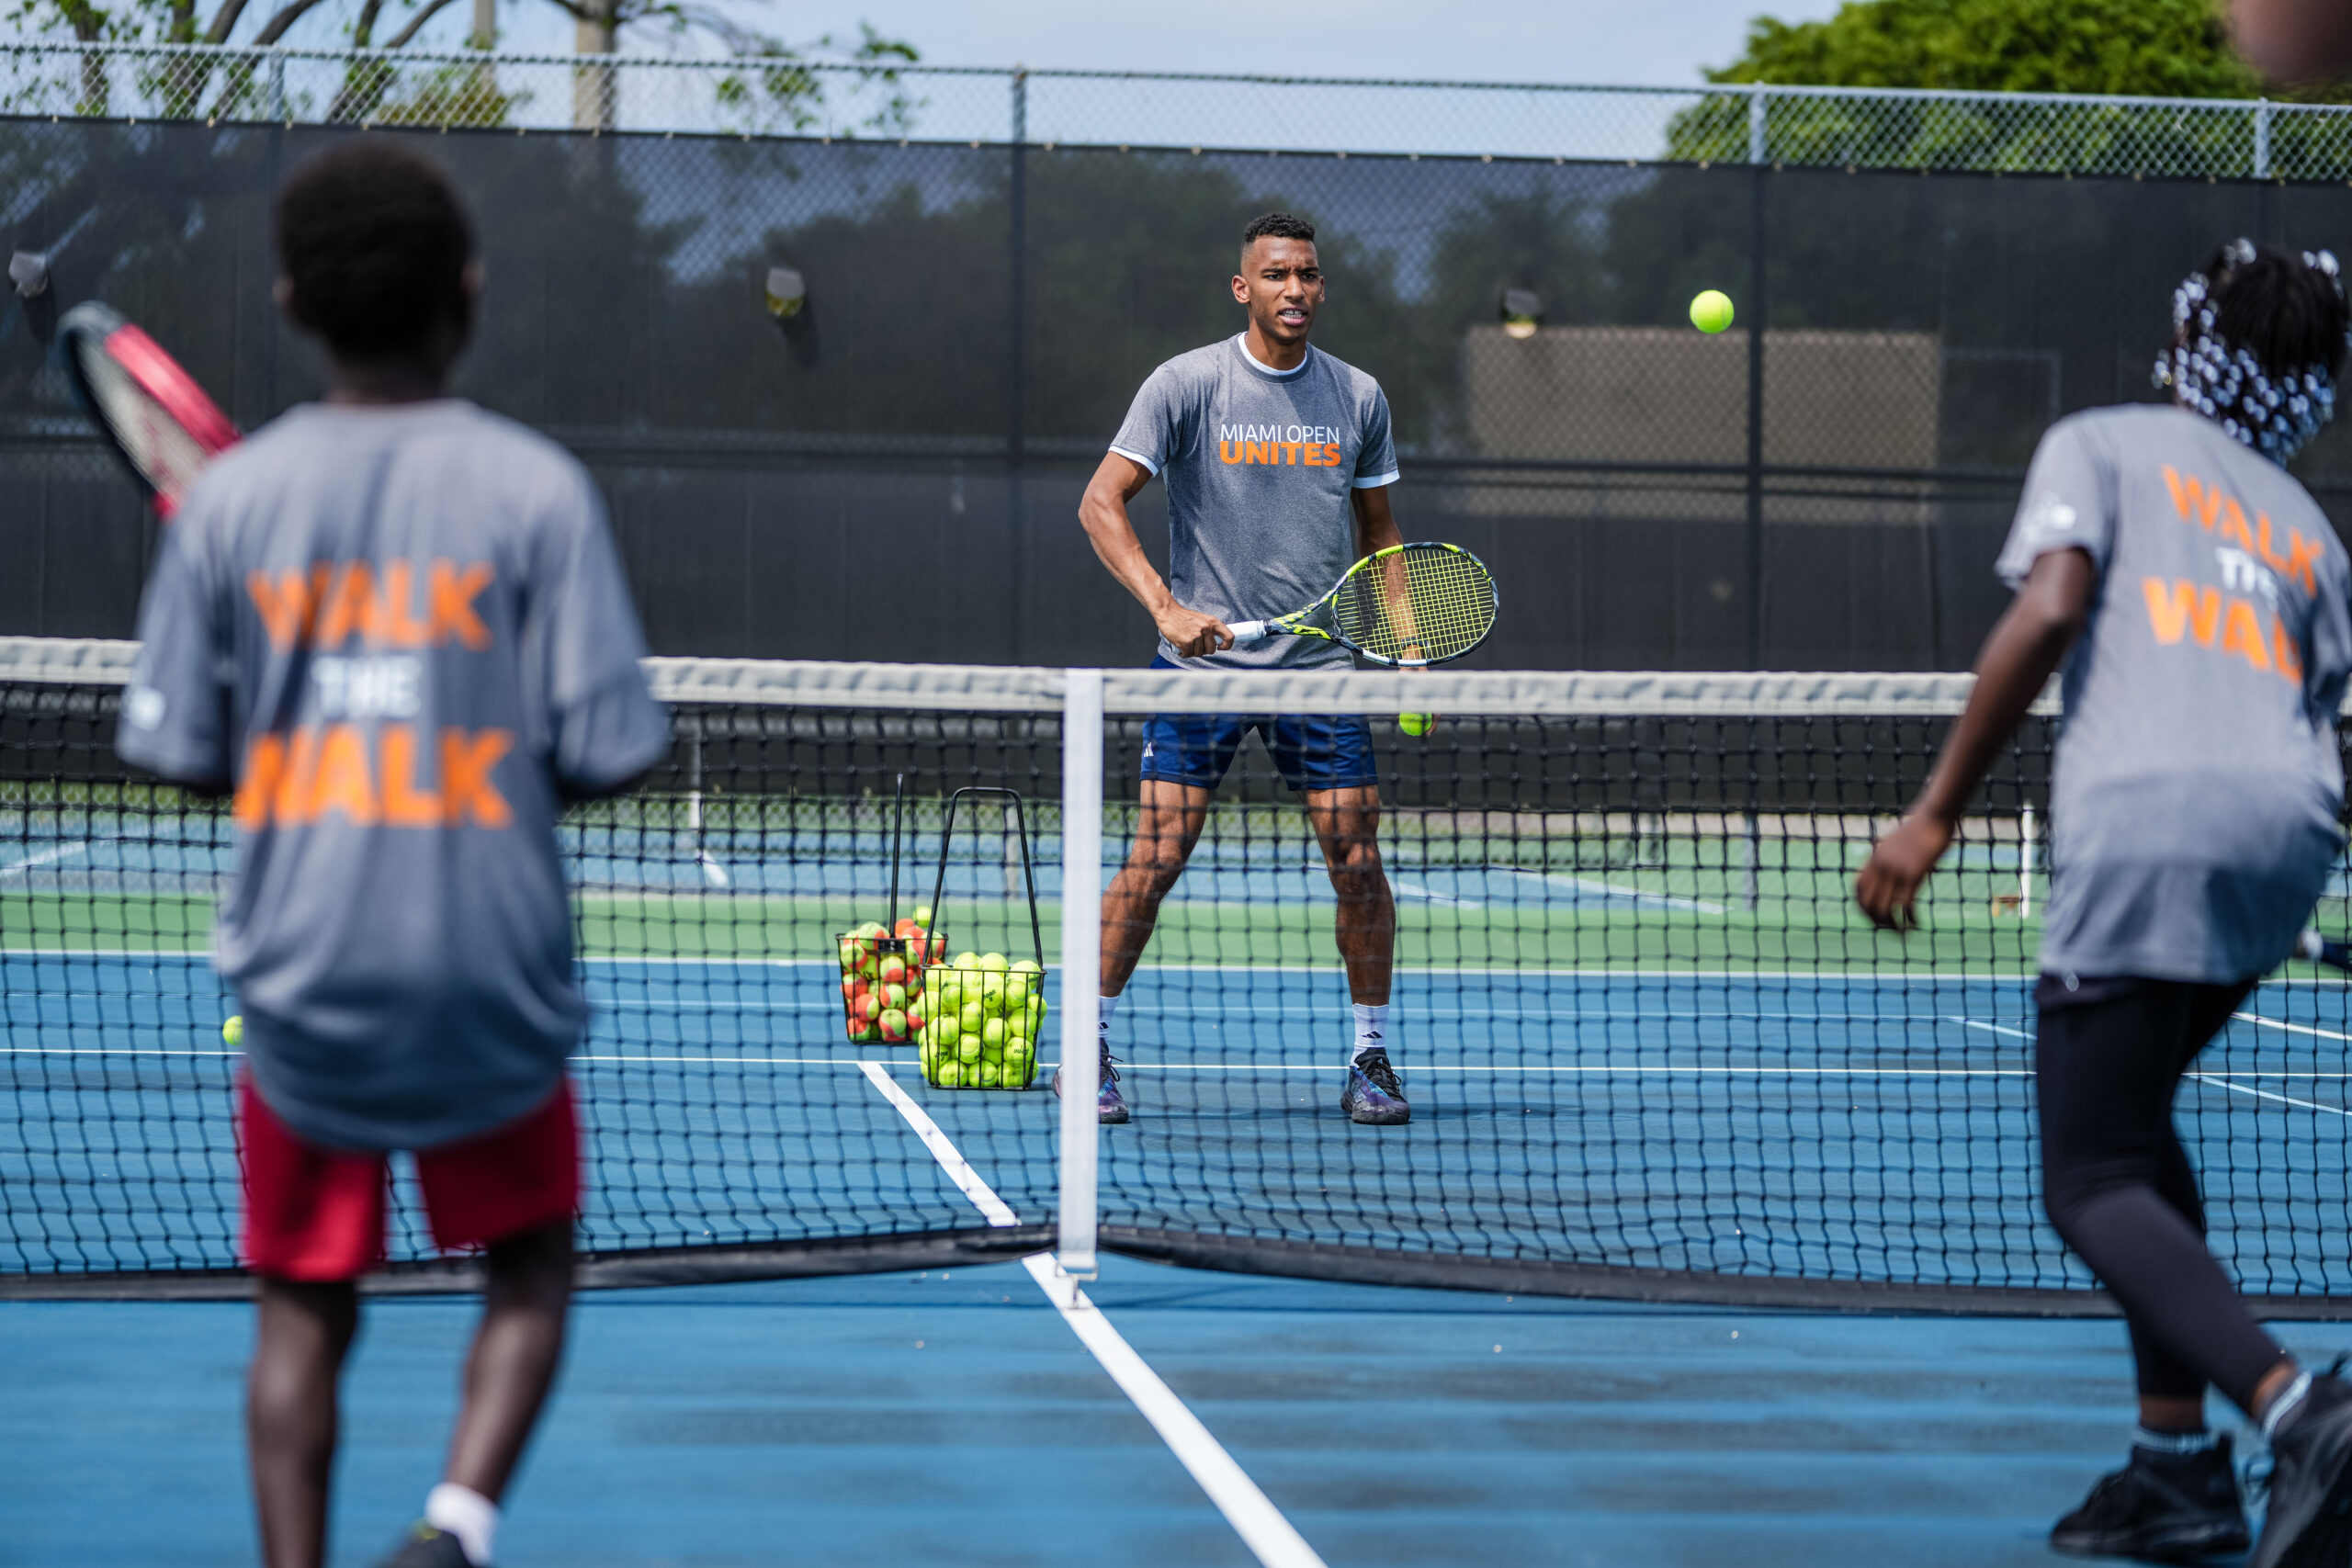 Felix Auger Aliassime on-court with participants of the tennis clinic at the Big Brothers, Big Sisters event at Moore Park in Miami on March 20, 2023.